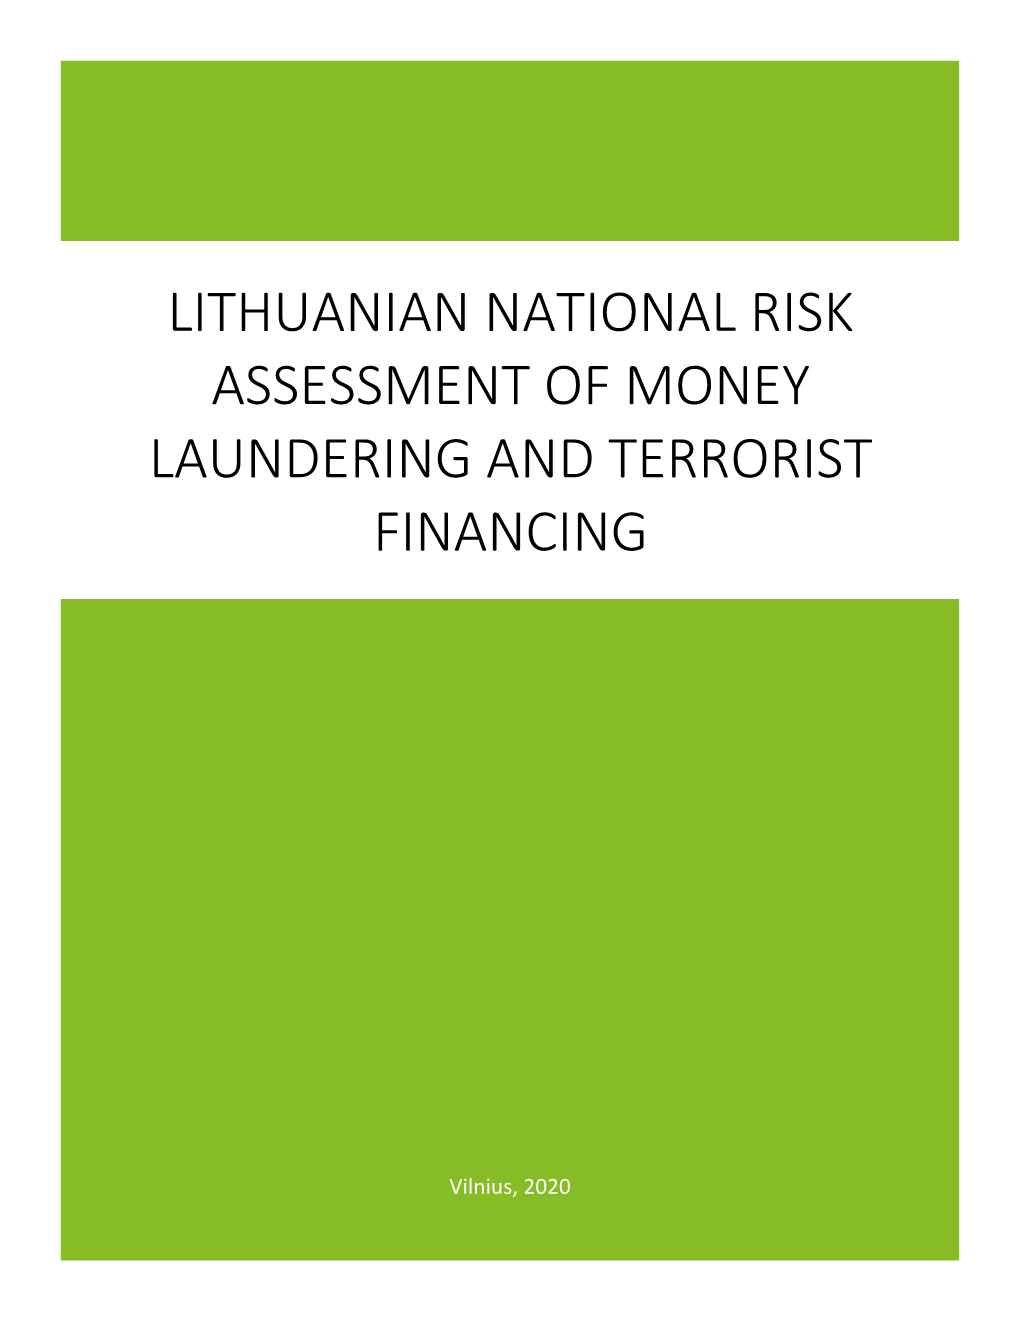 Lithuanian National Risk Assessment of Money Laundering and Terrorist Financing